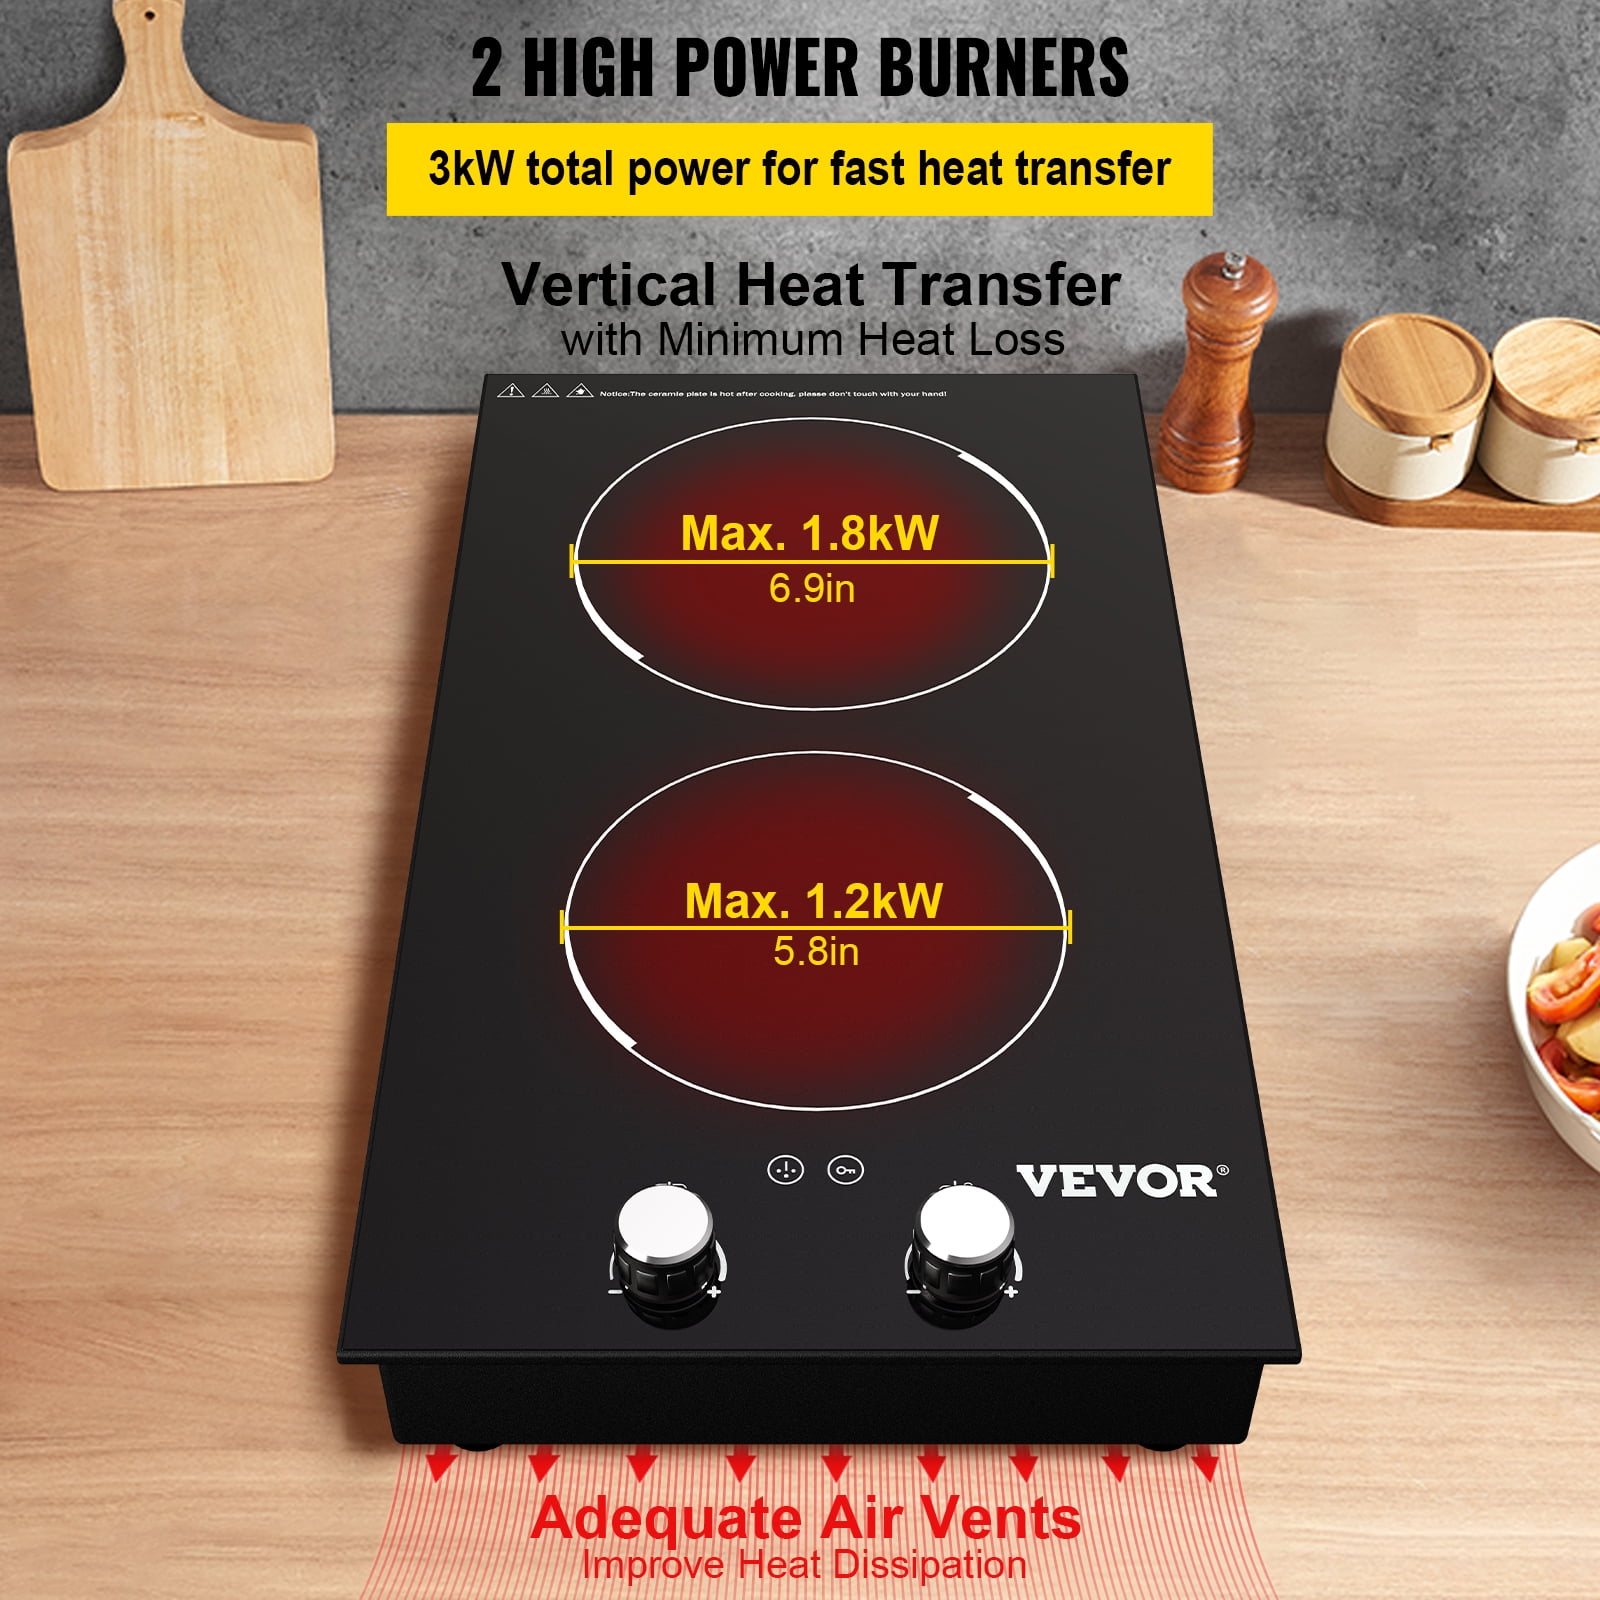 VEVOR Built-In Induction Cooktop 35 inch 5 Burners 220V Ceramic Glass Electric Stove Top with Knob Control Timer & Child Lock Included 9 Power